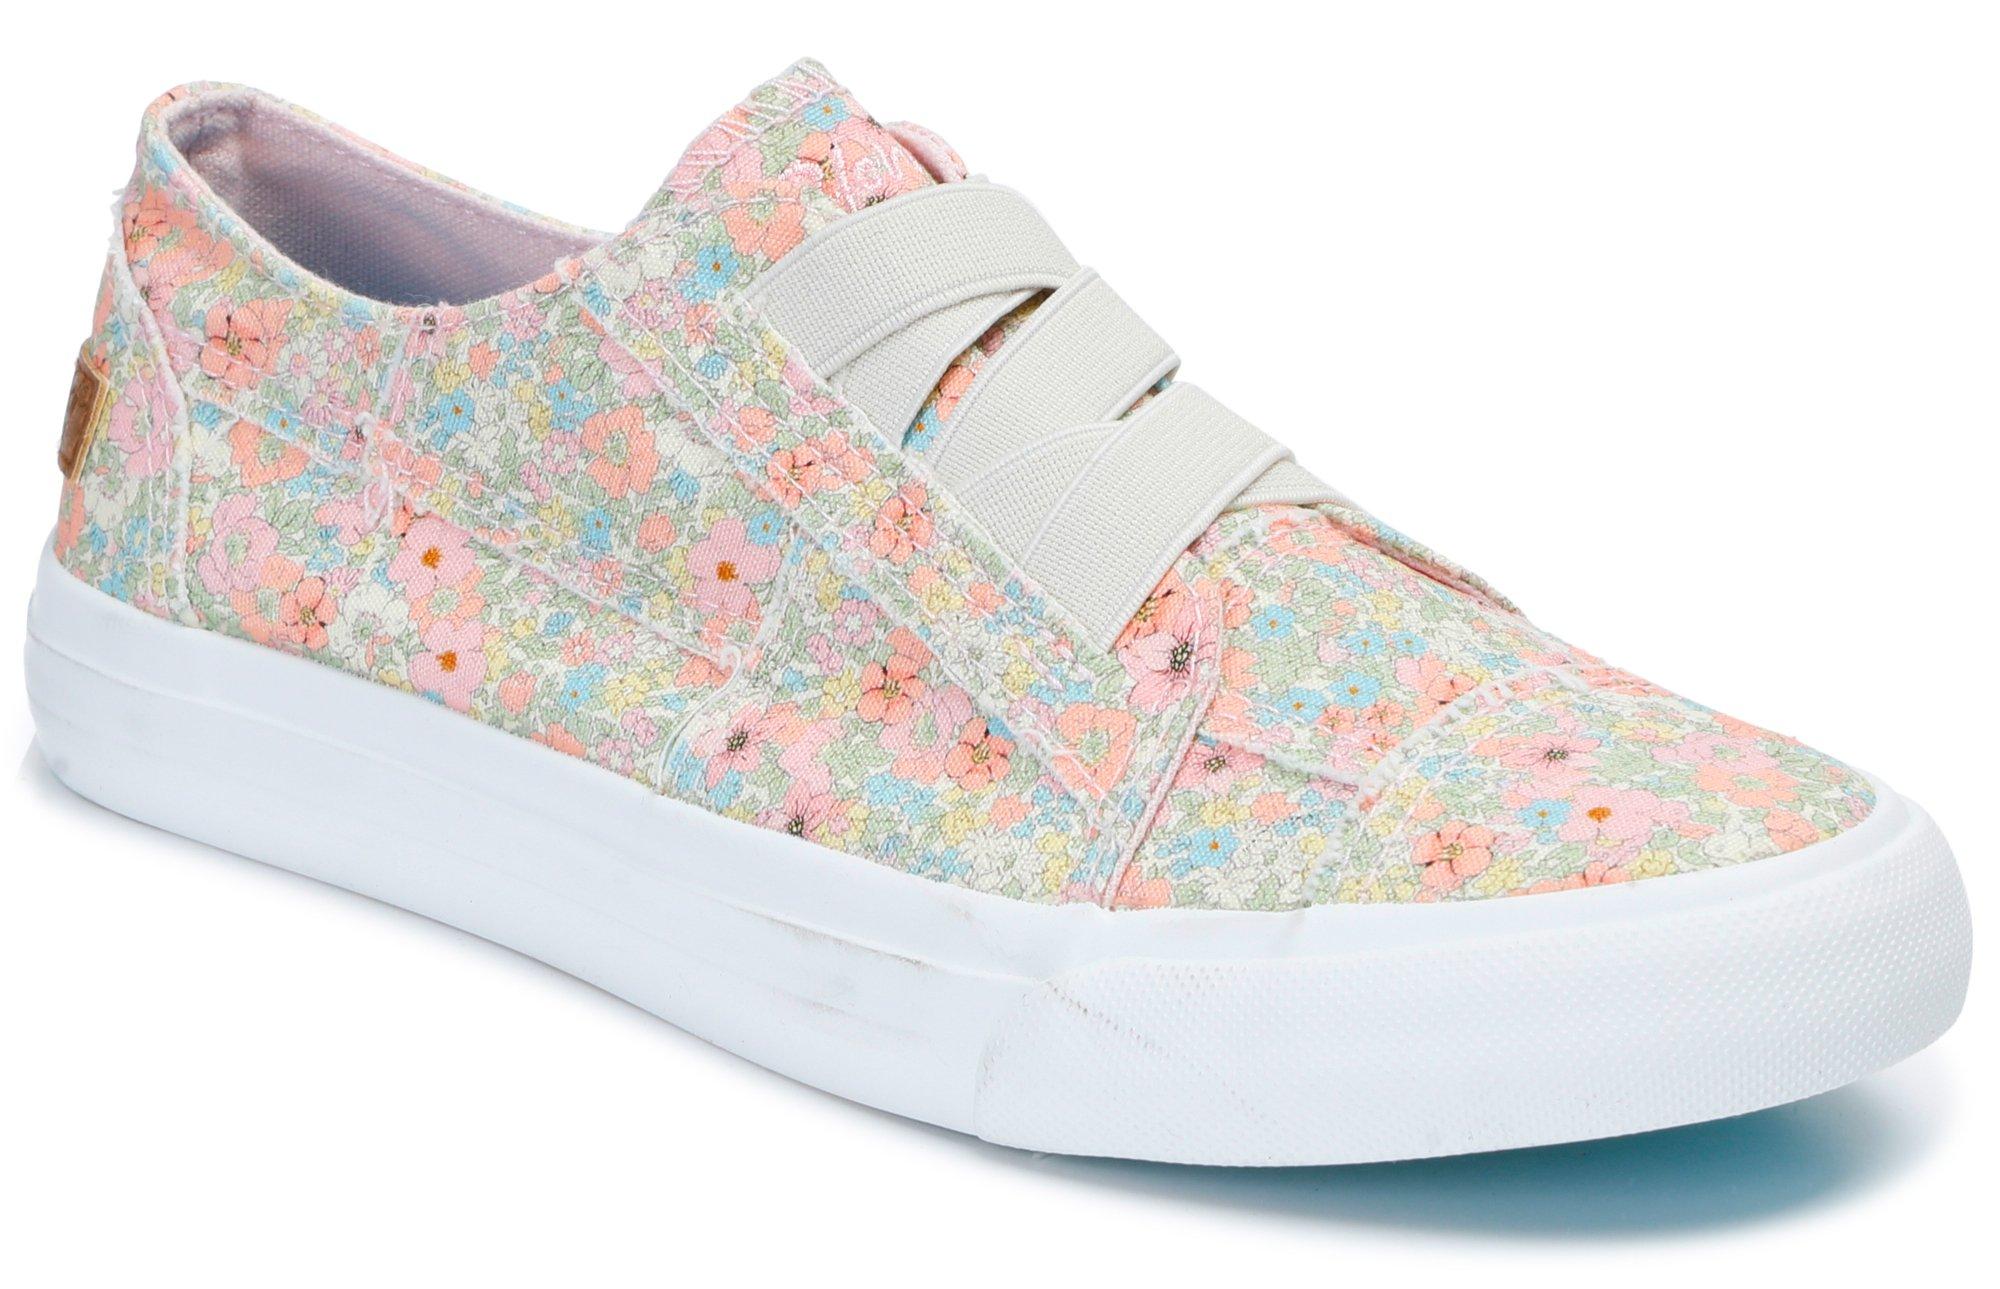 Women's Floral Canvas Sneakers